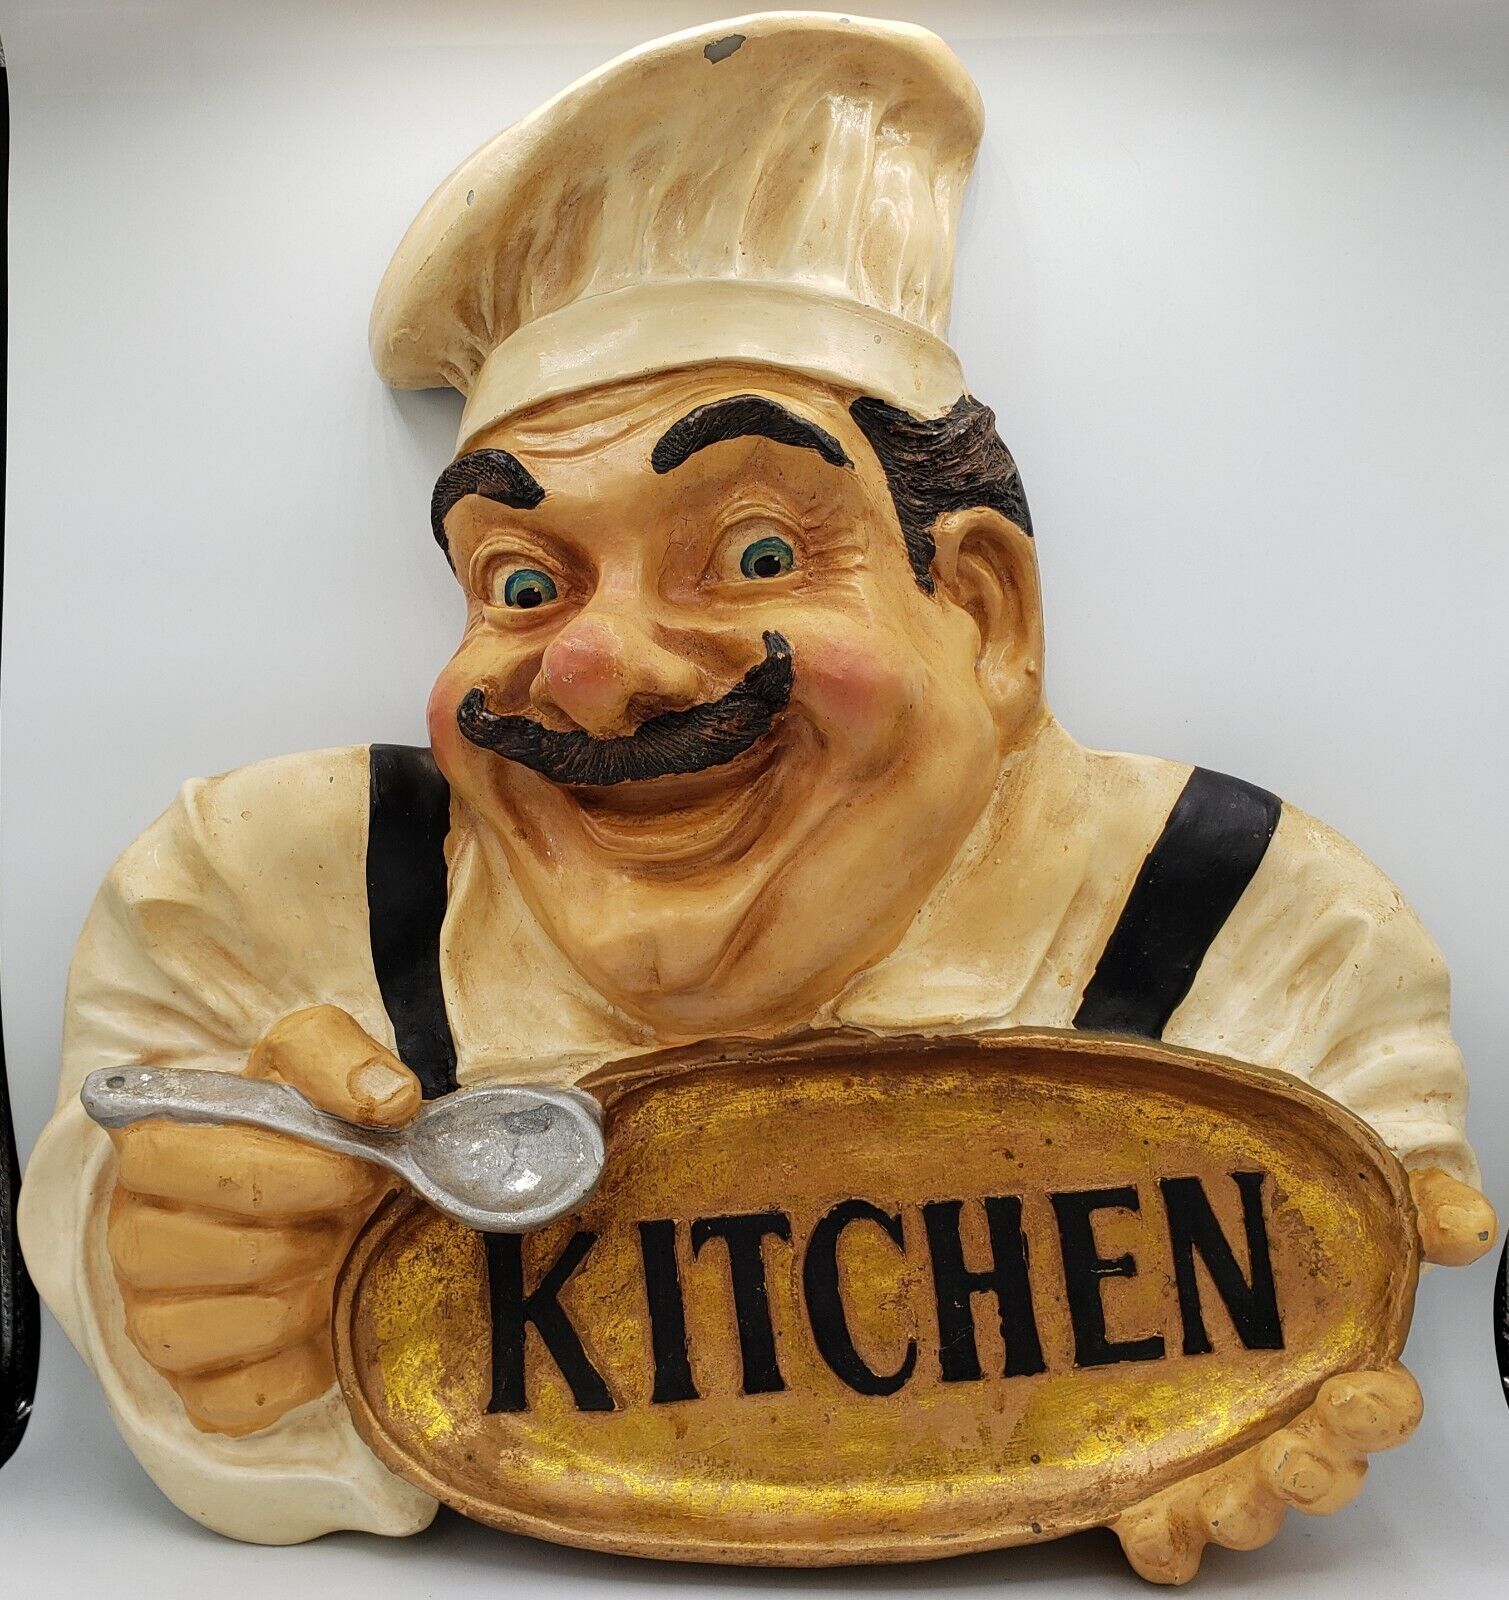 Vintage Kitchen Welcoming Italian Chef Wall Plaque Restaurant Pizza Shop Food